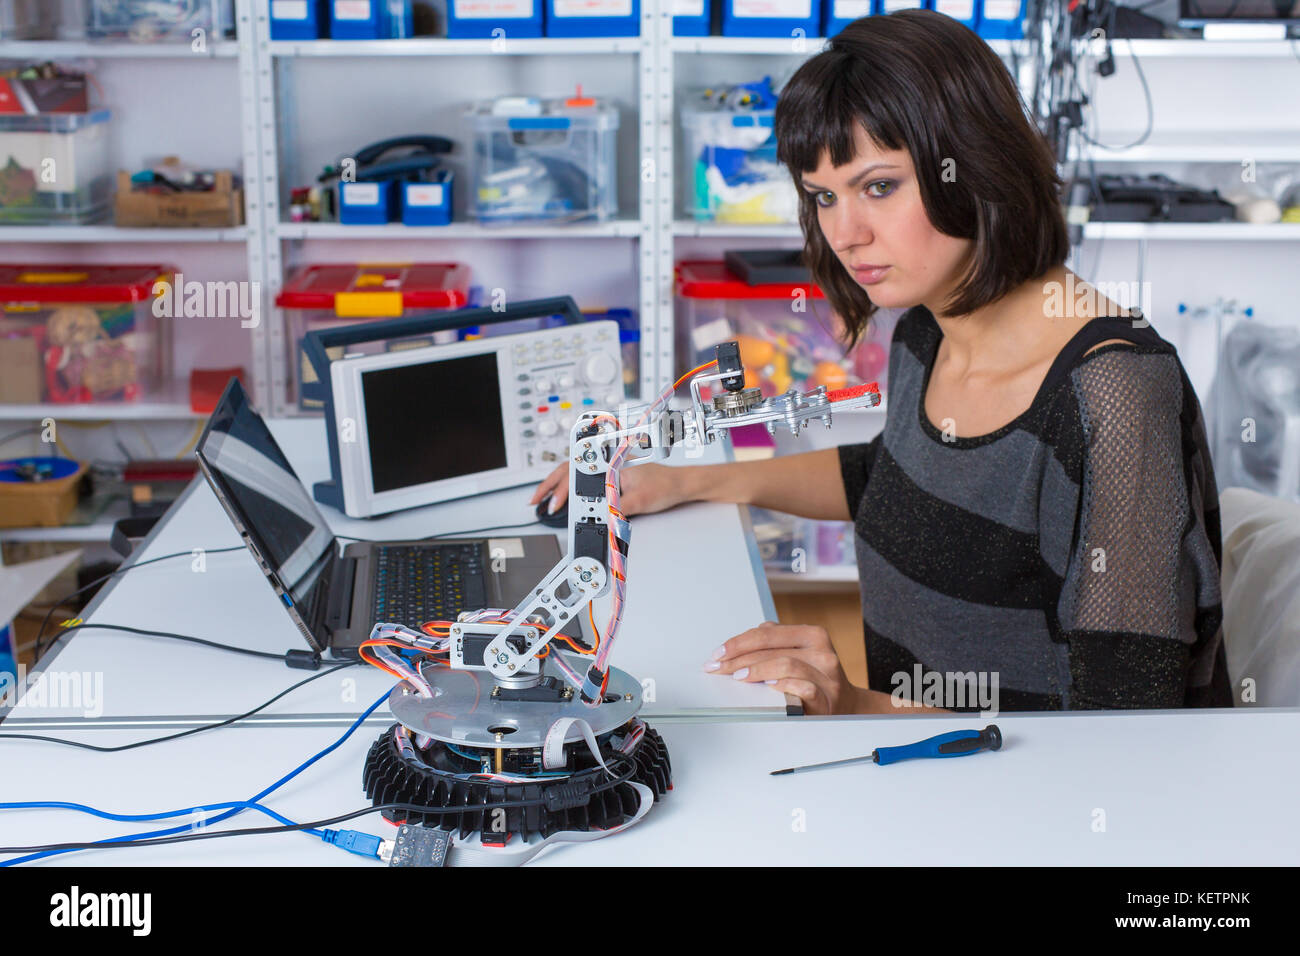 Female in robotics laboratory. Young woman experiment with robot Stock Photo